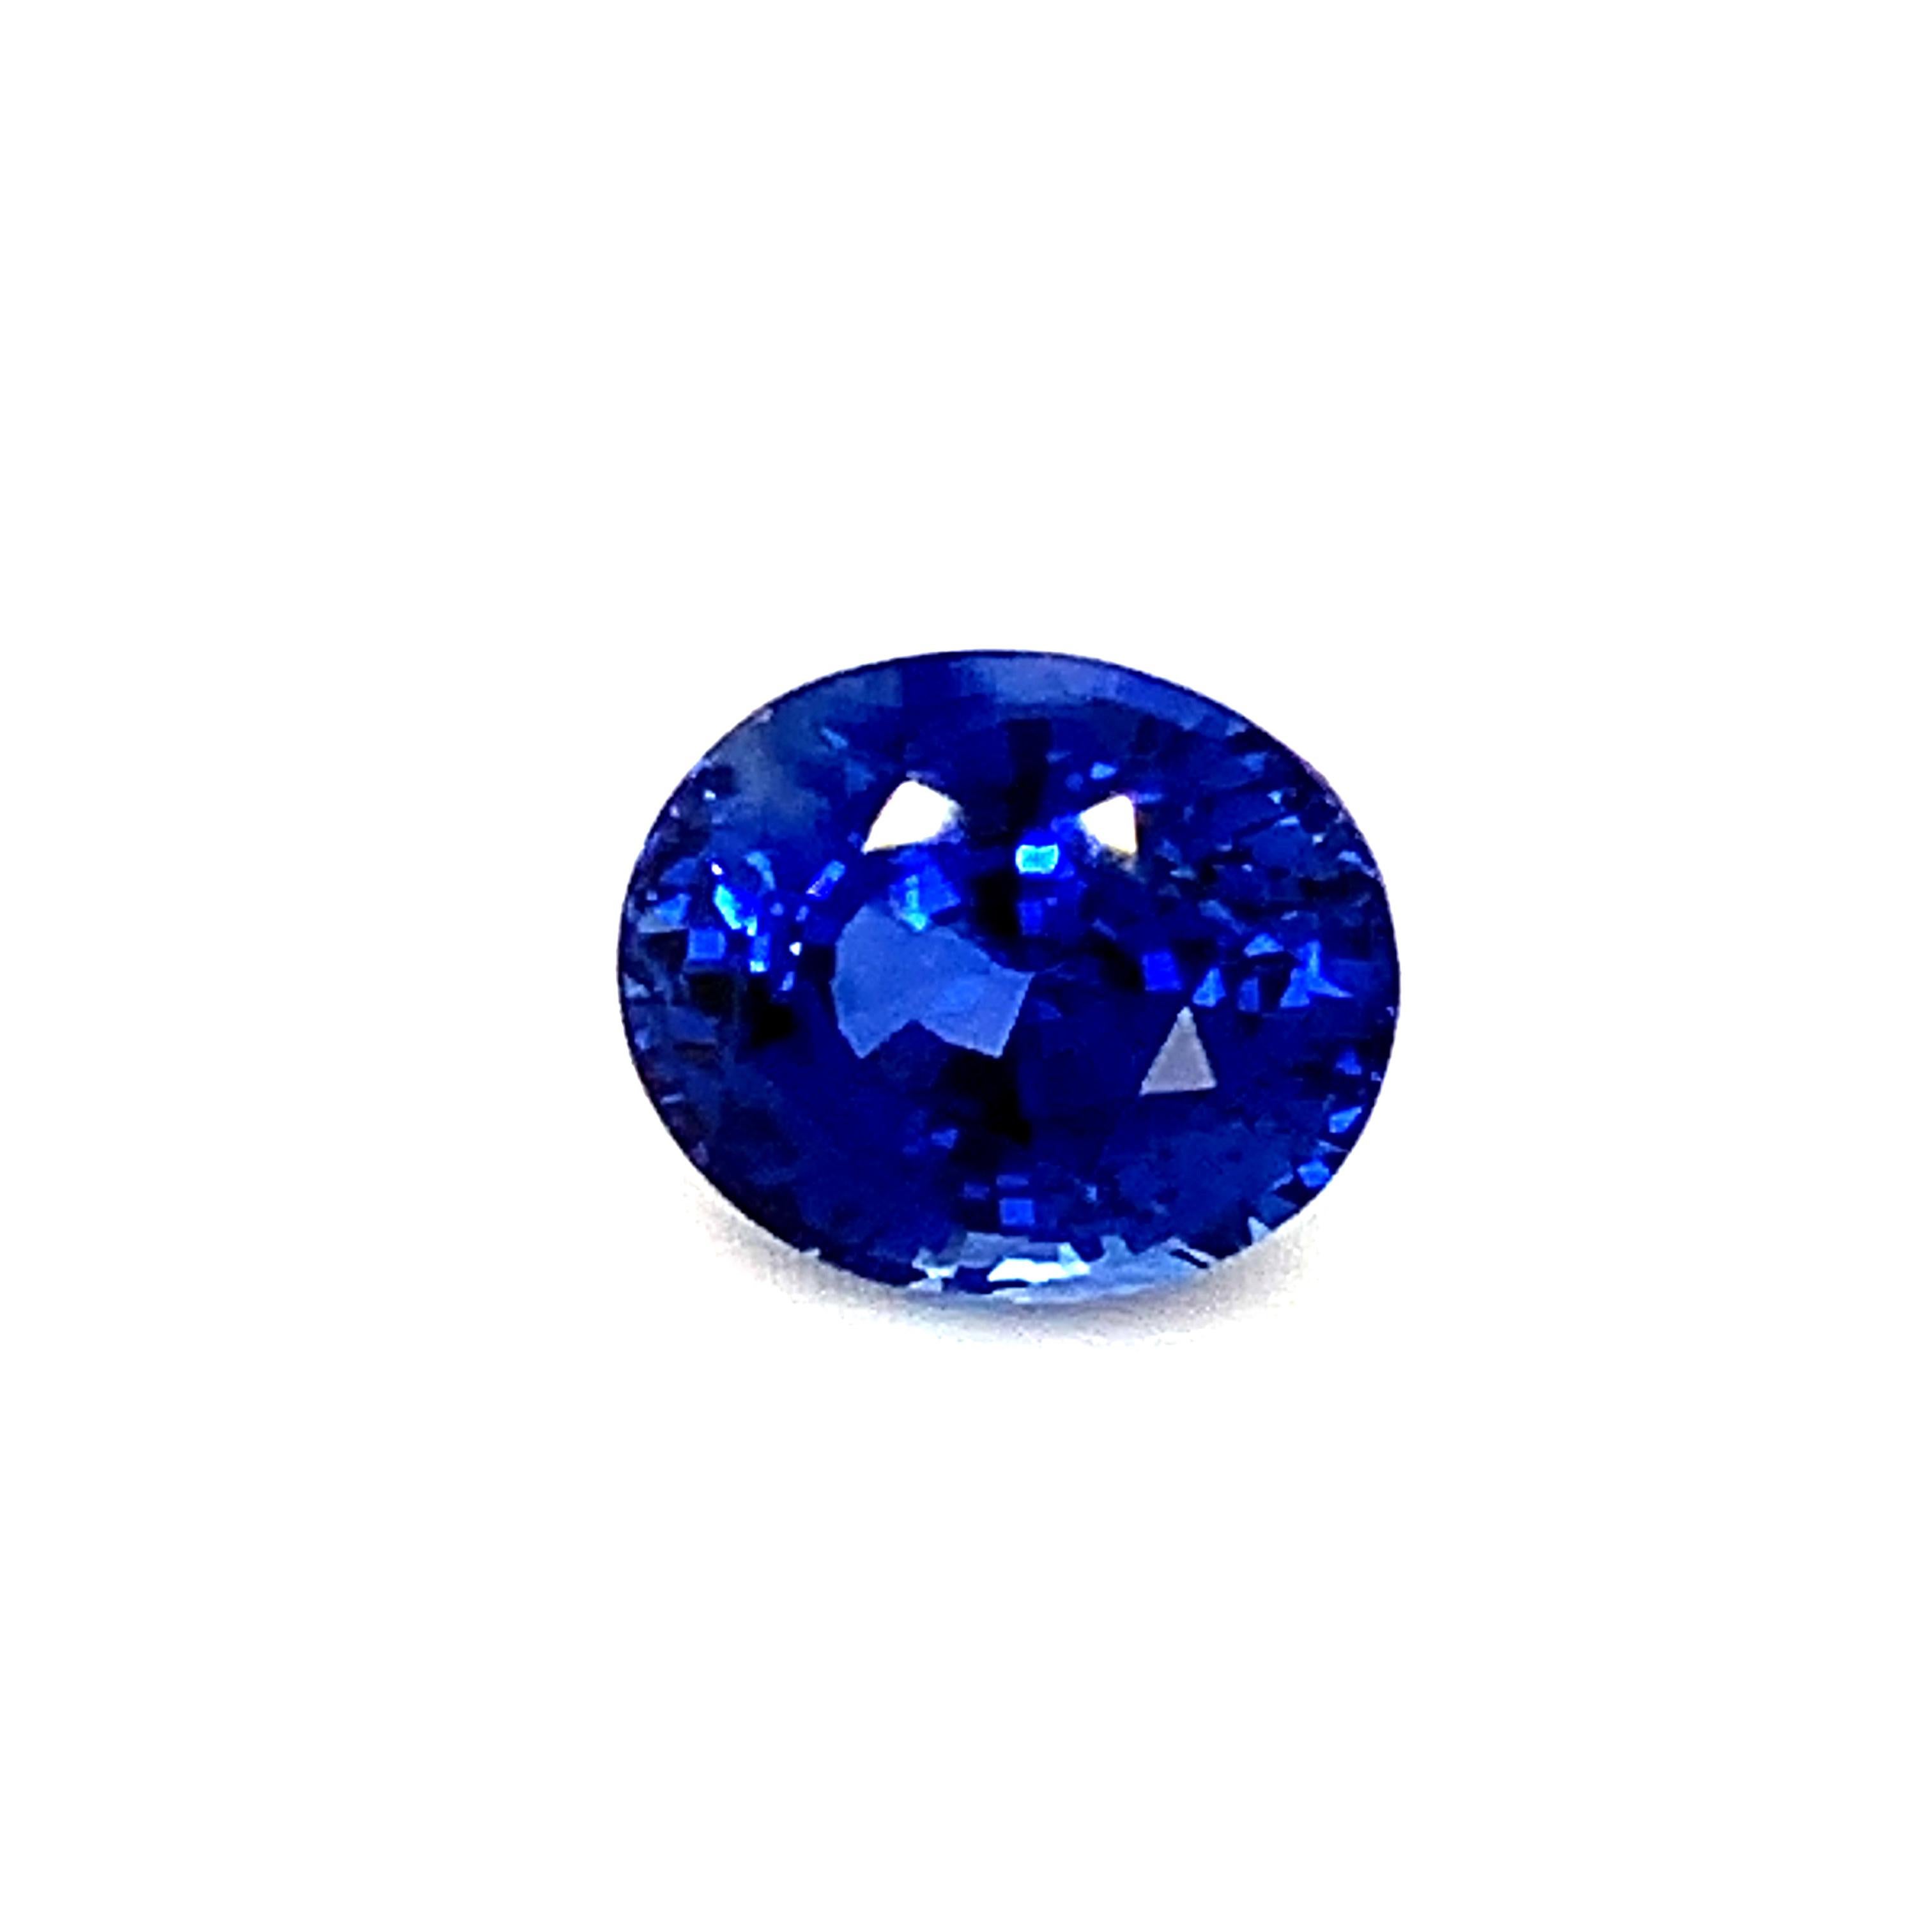 Women's or Men's 6.52 Carat Blue Sapphire Oval, Unset Loose Gemstone, GIA Certified 